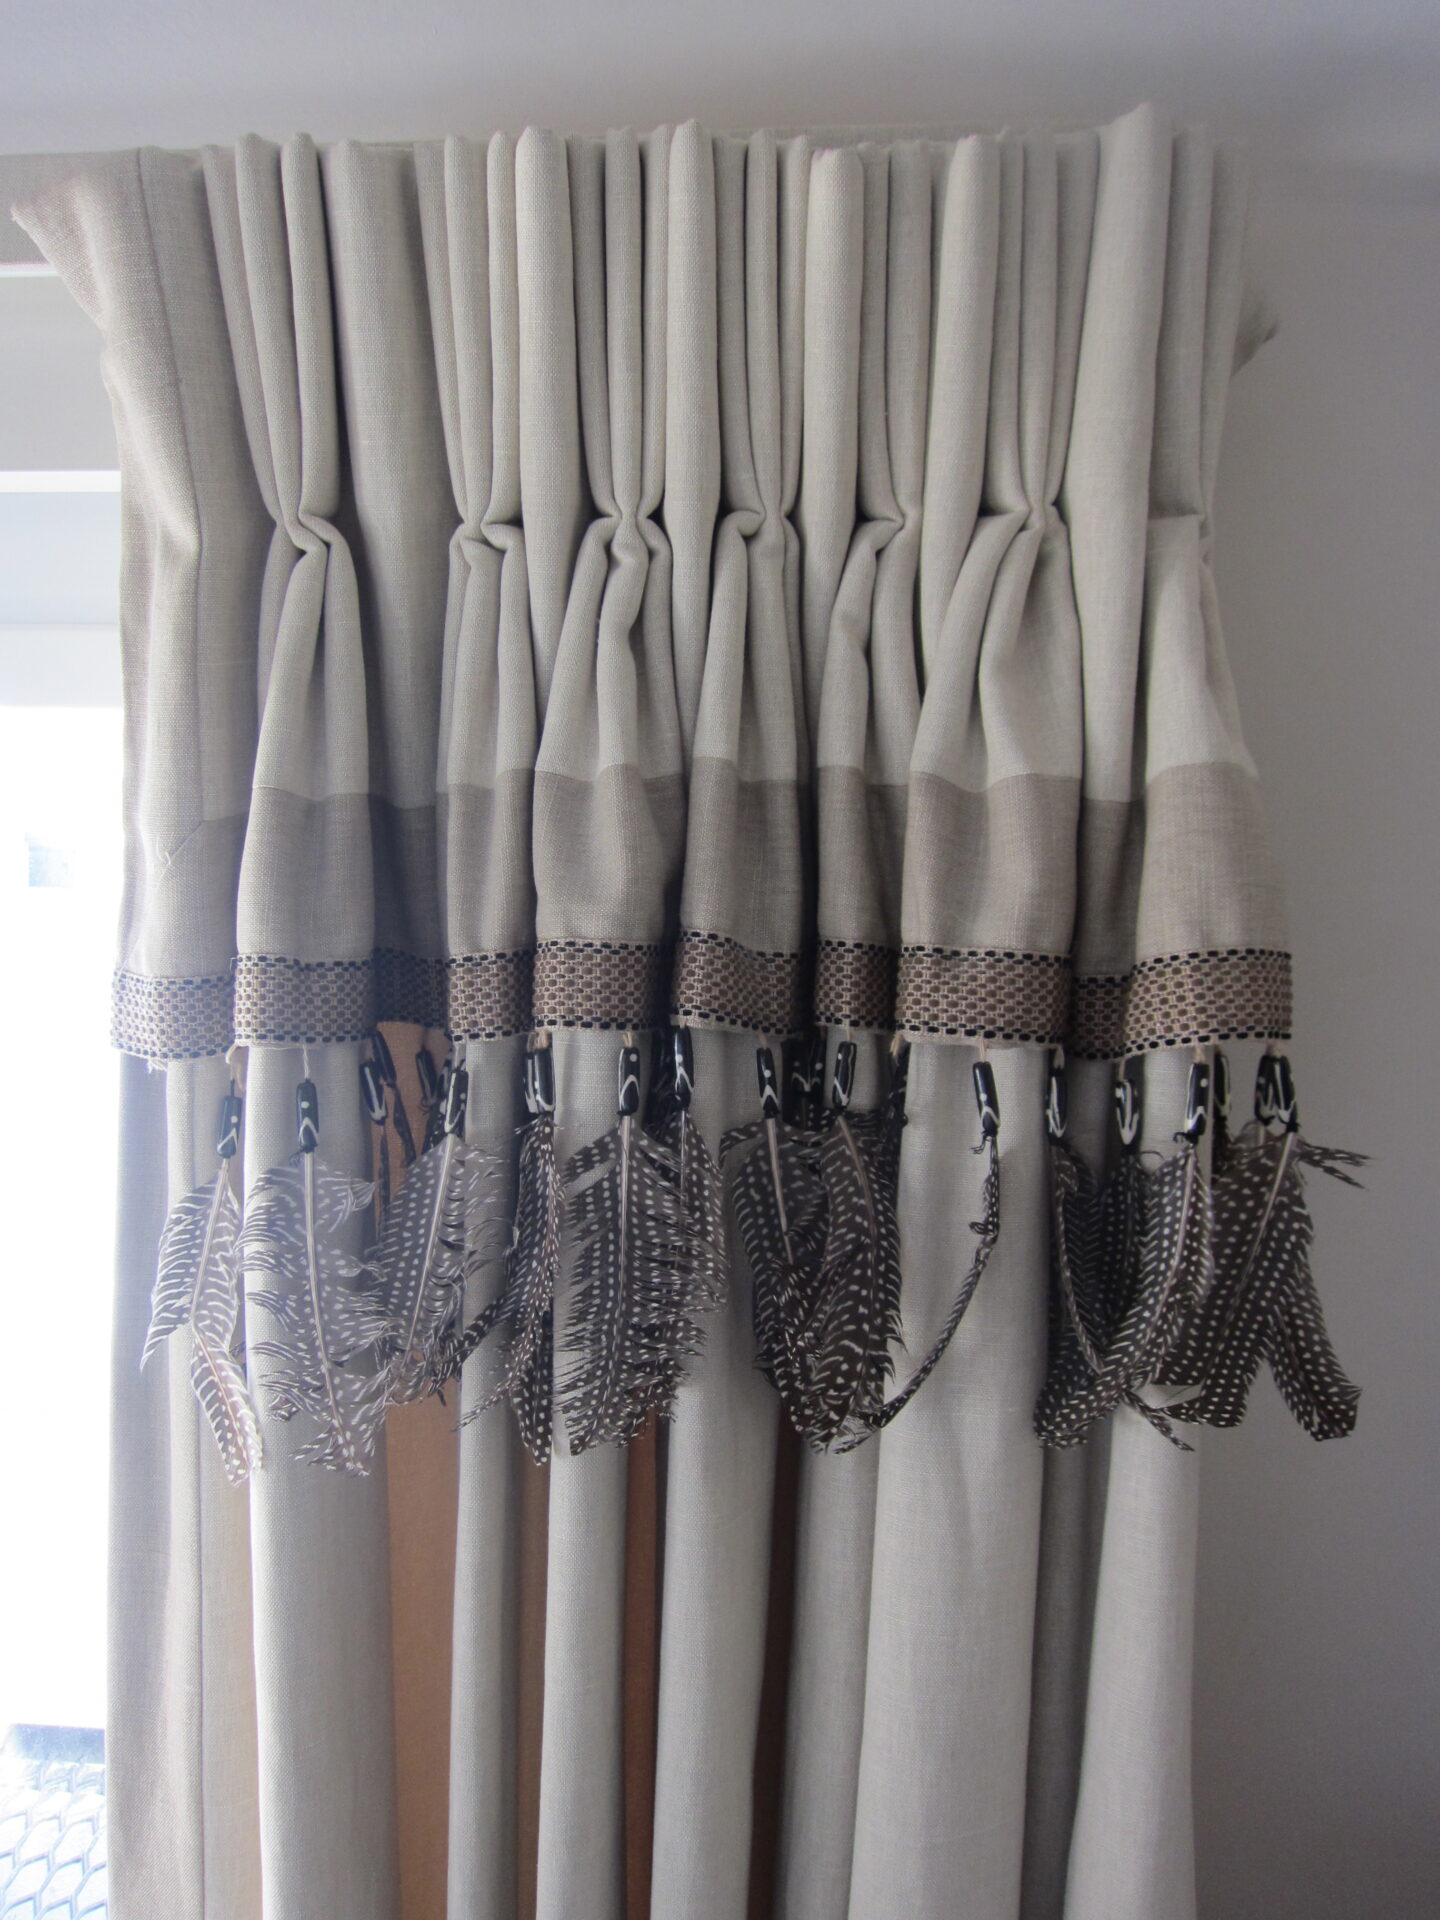 Feather trim on curtains – Number 16 – London – England | Just One Suitcase